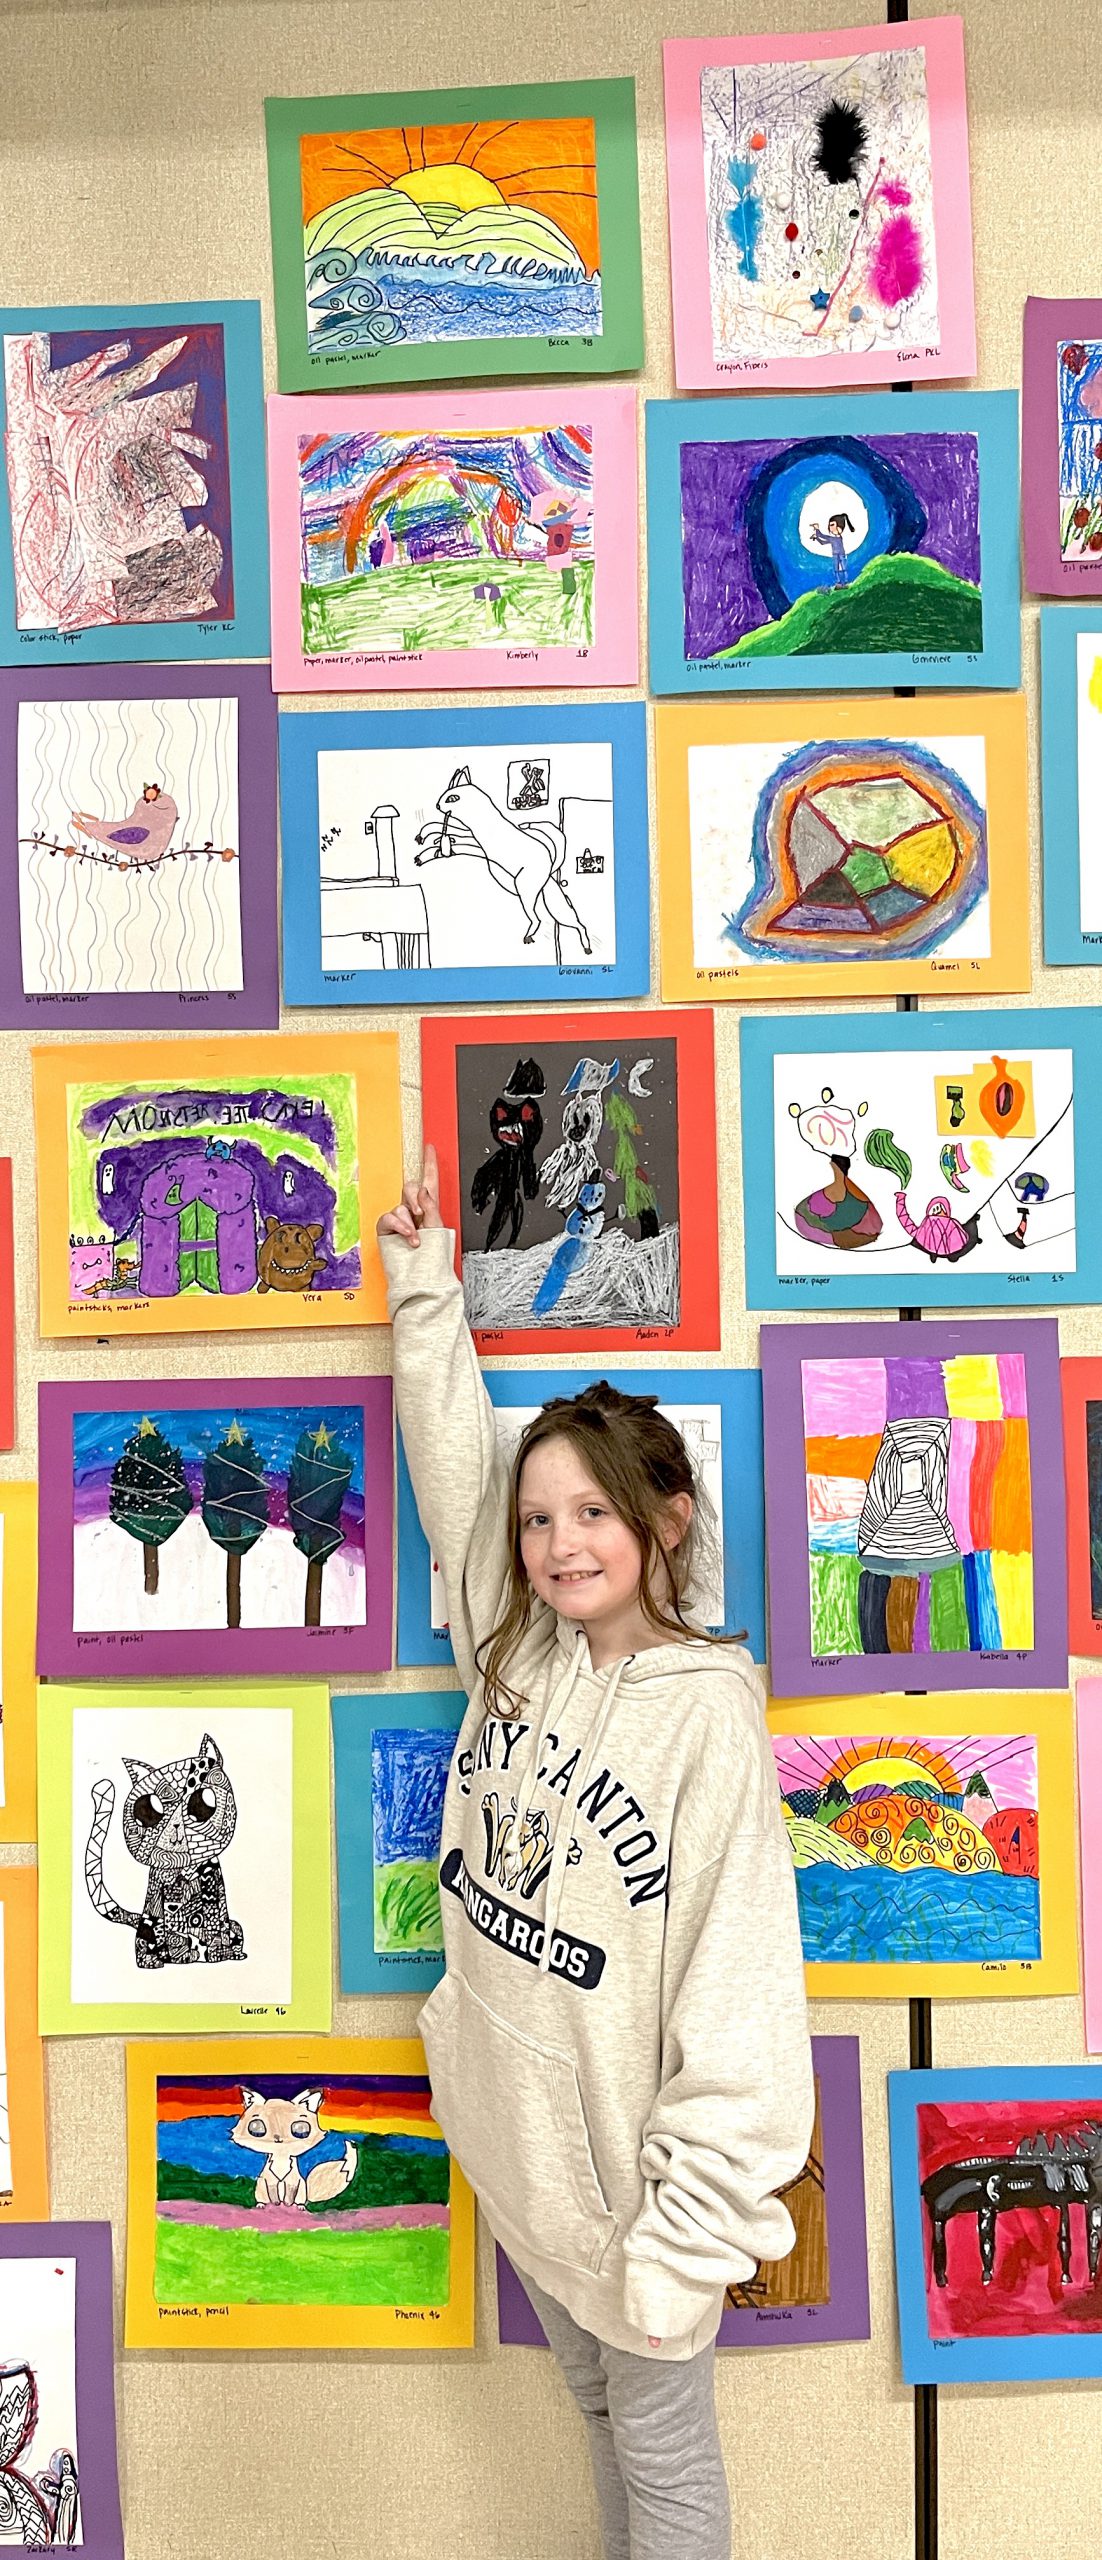 A girl with longer light hair, wearing a tan sweatshirt, points way up high to her piece of artwork high up on the wall.